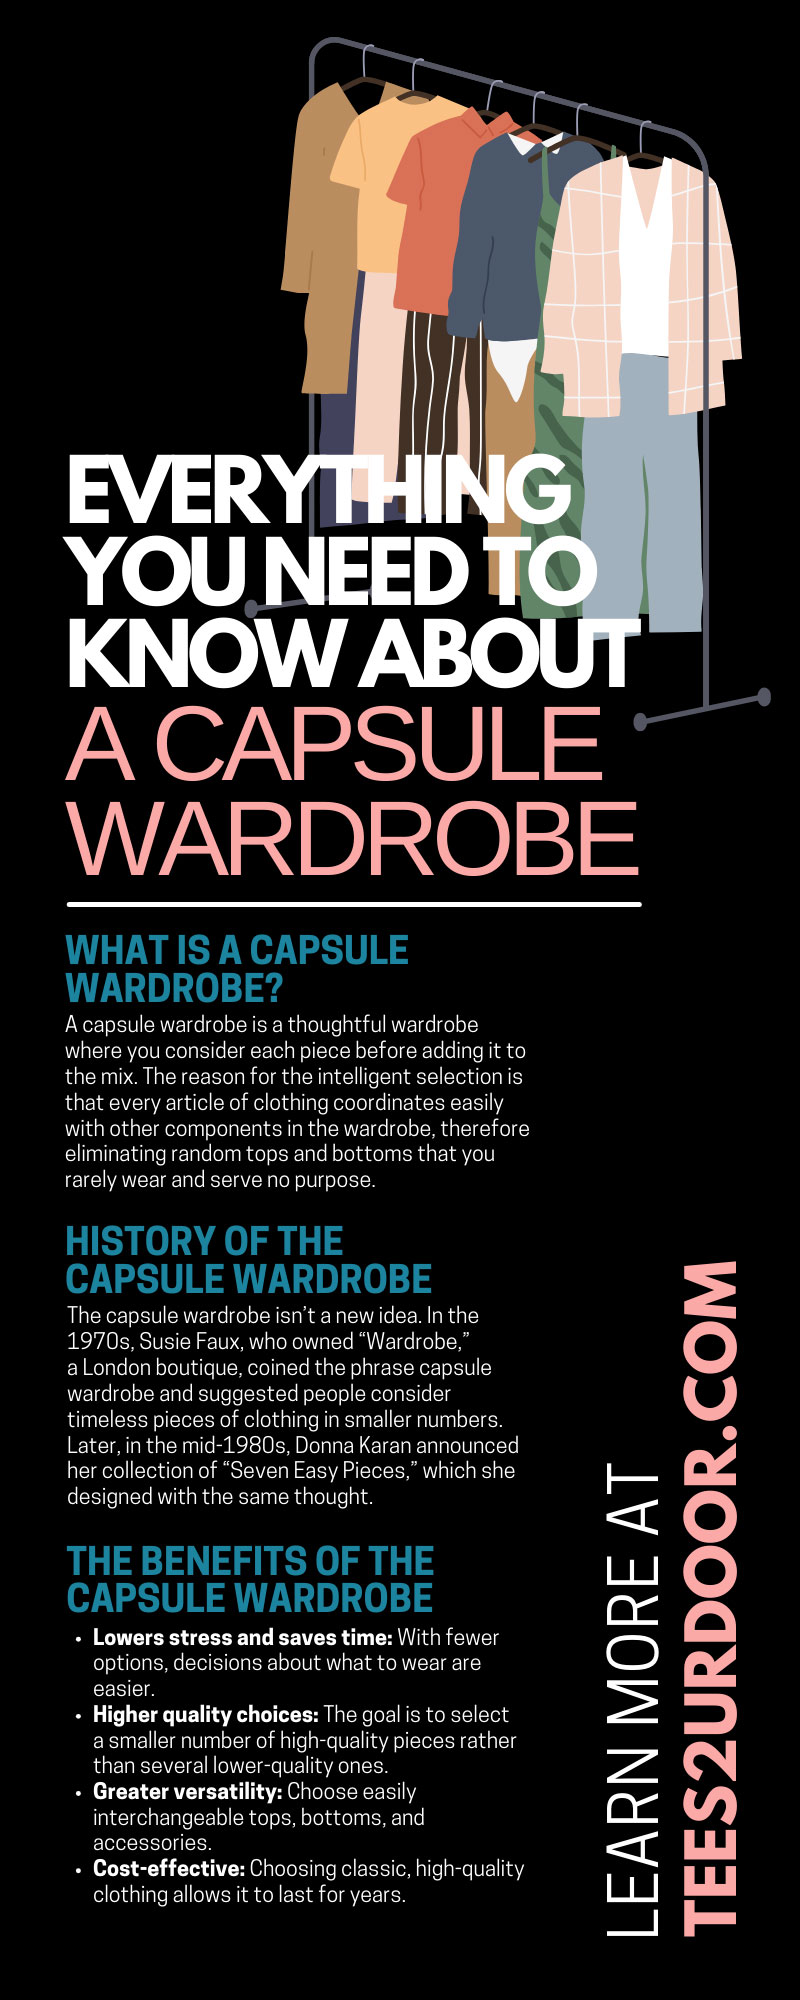 Everything You Need To Know About a Capsule Wardrobe - Tees2urdoor